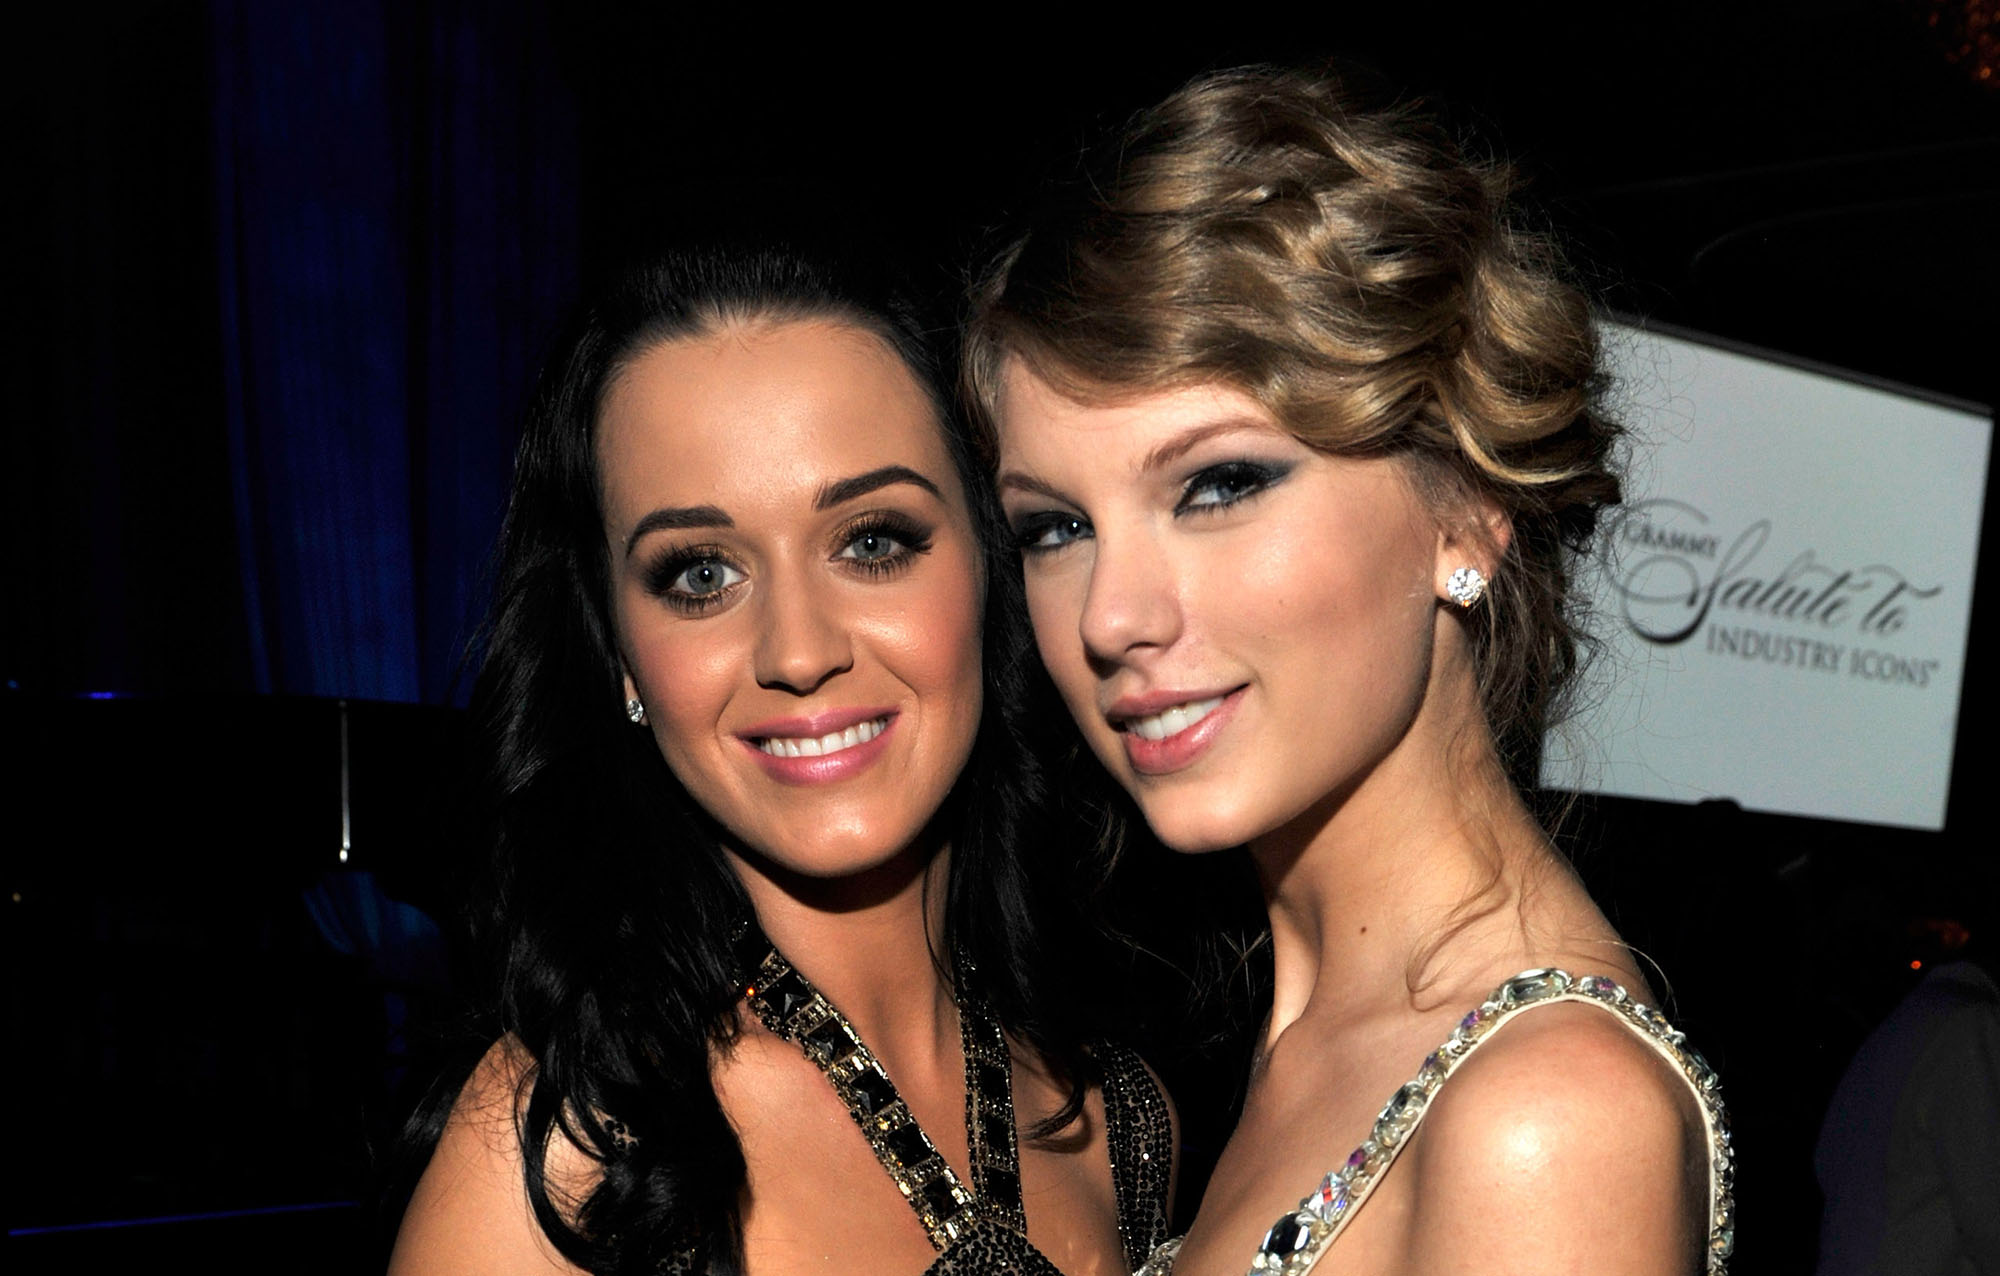 The years-long feud between Taylor Swift and Katy Perry comes to an end finally